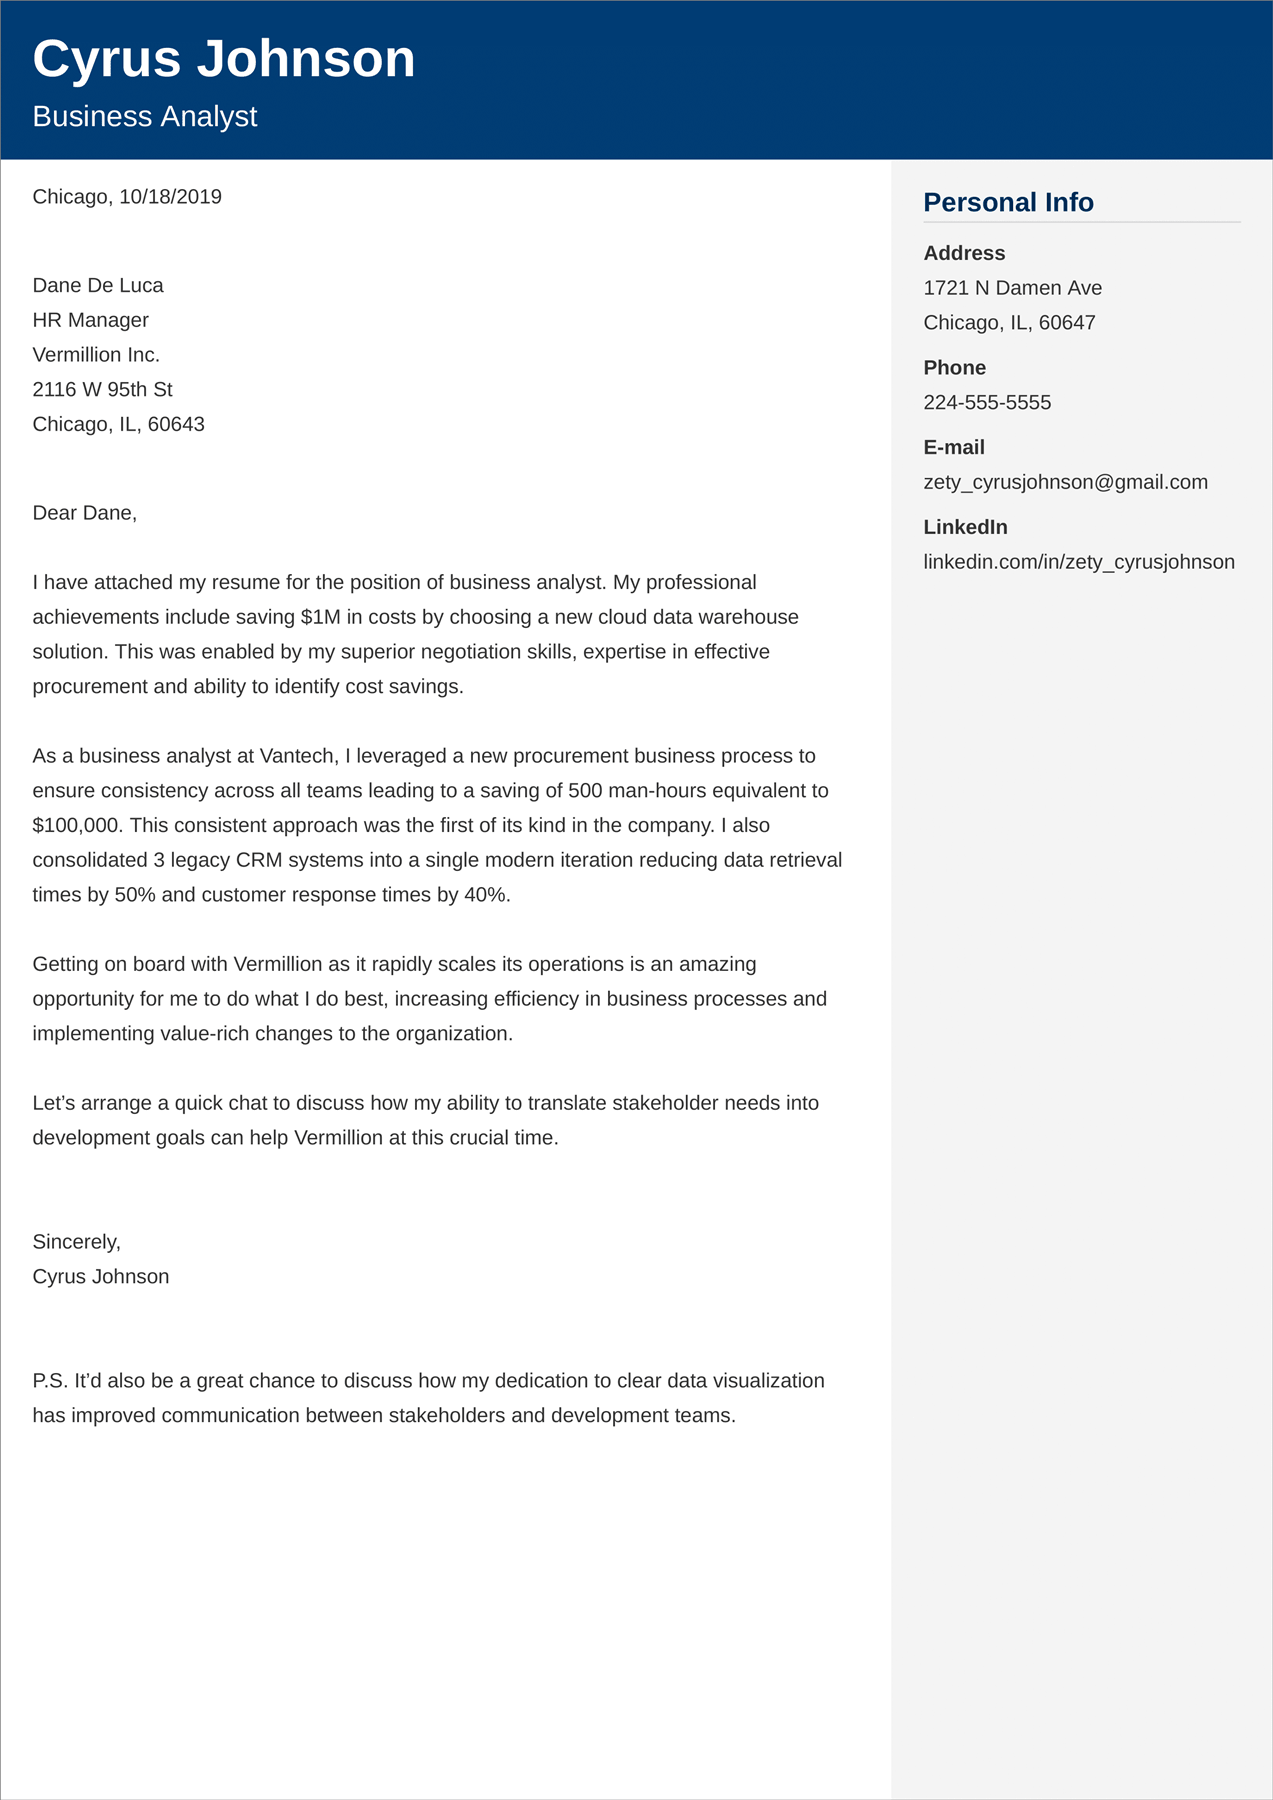 Line Spacing For Cover Letter from cdn-images.zety.com